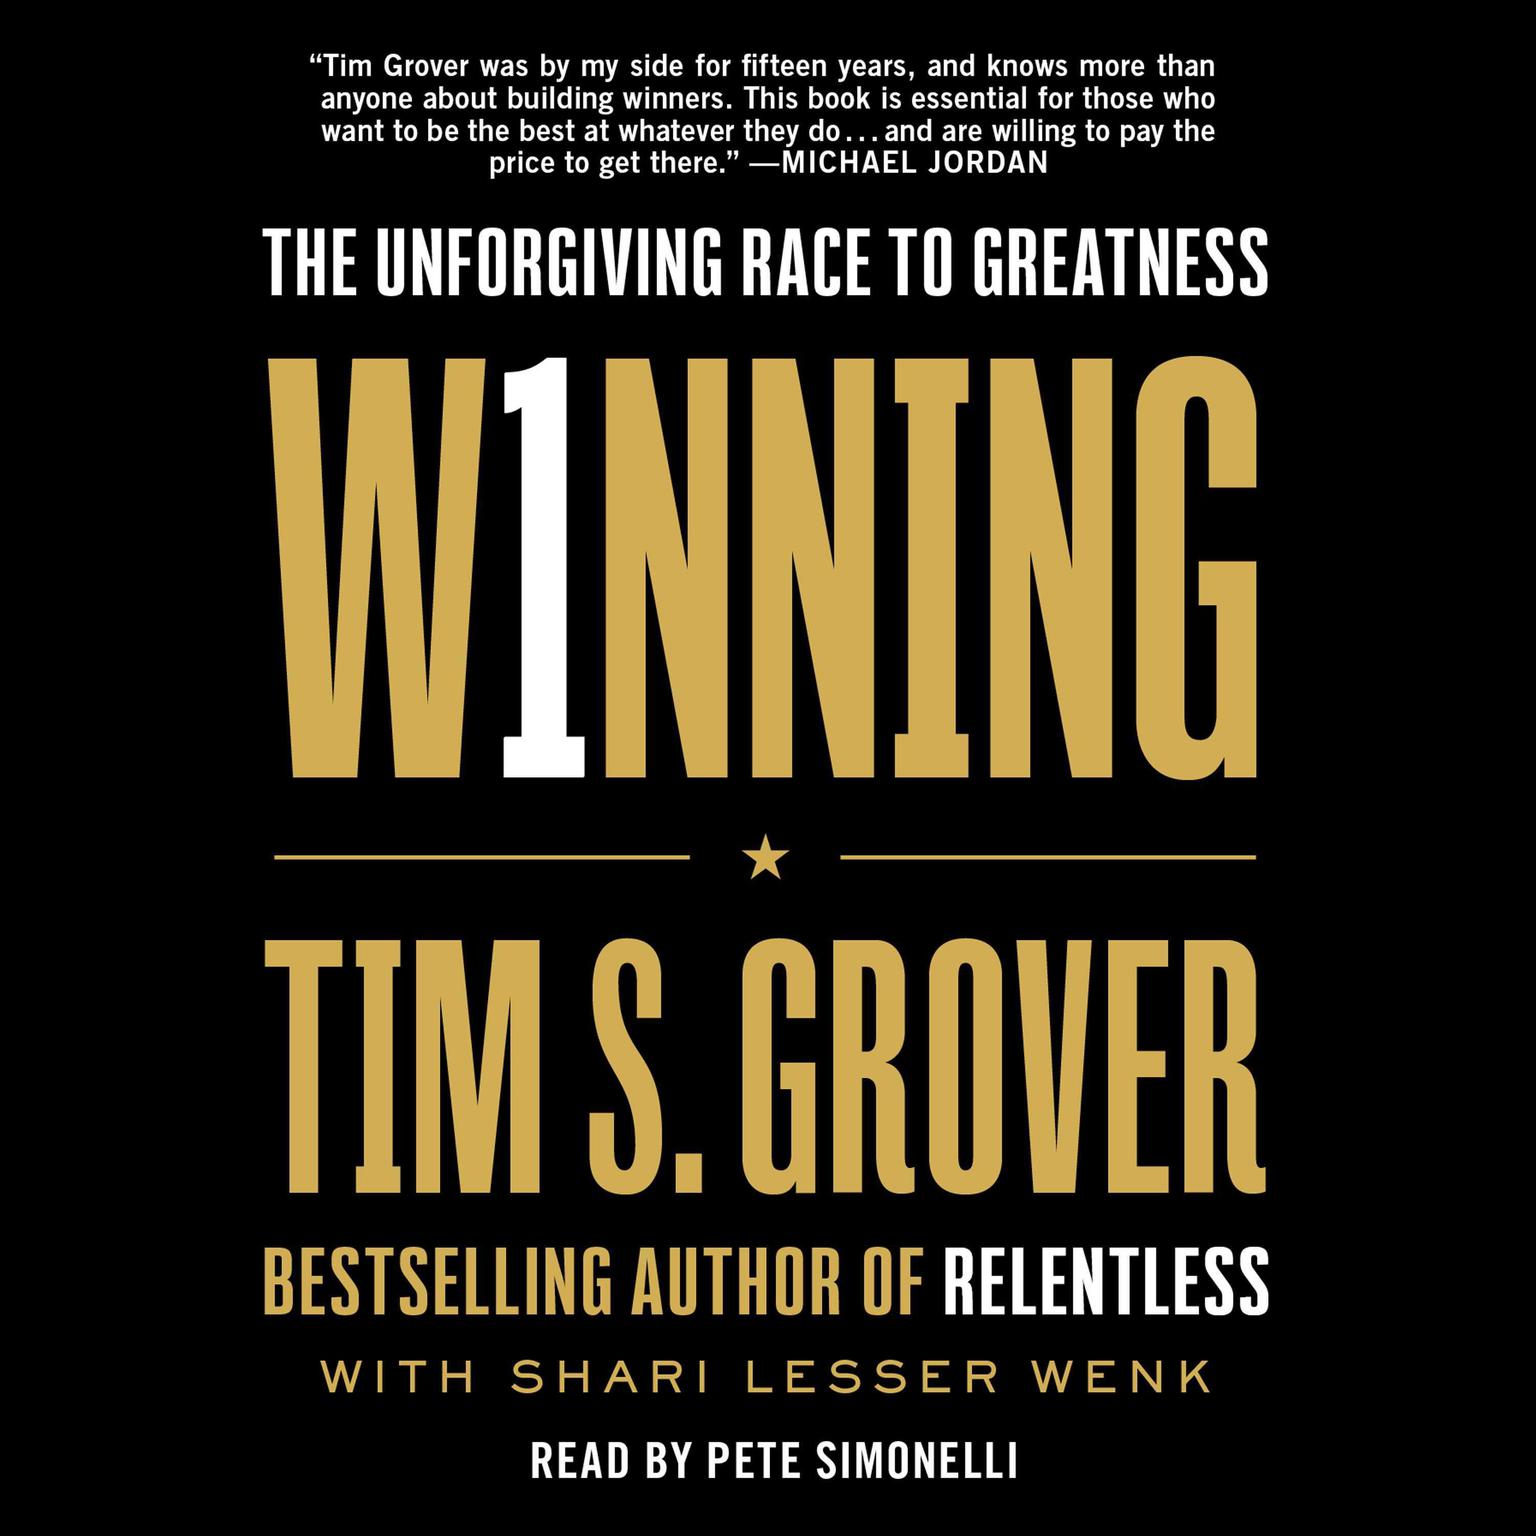 Winning: The Unforgiving Race to Greatness Audiobook, by Tim S. Grover